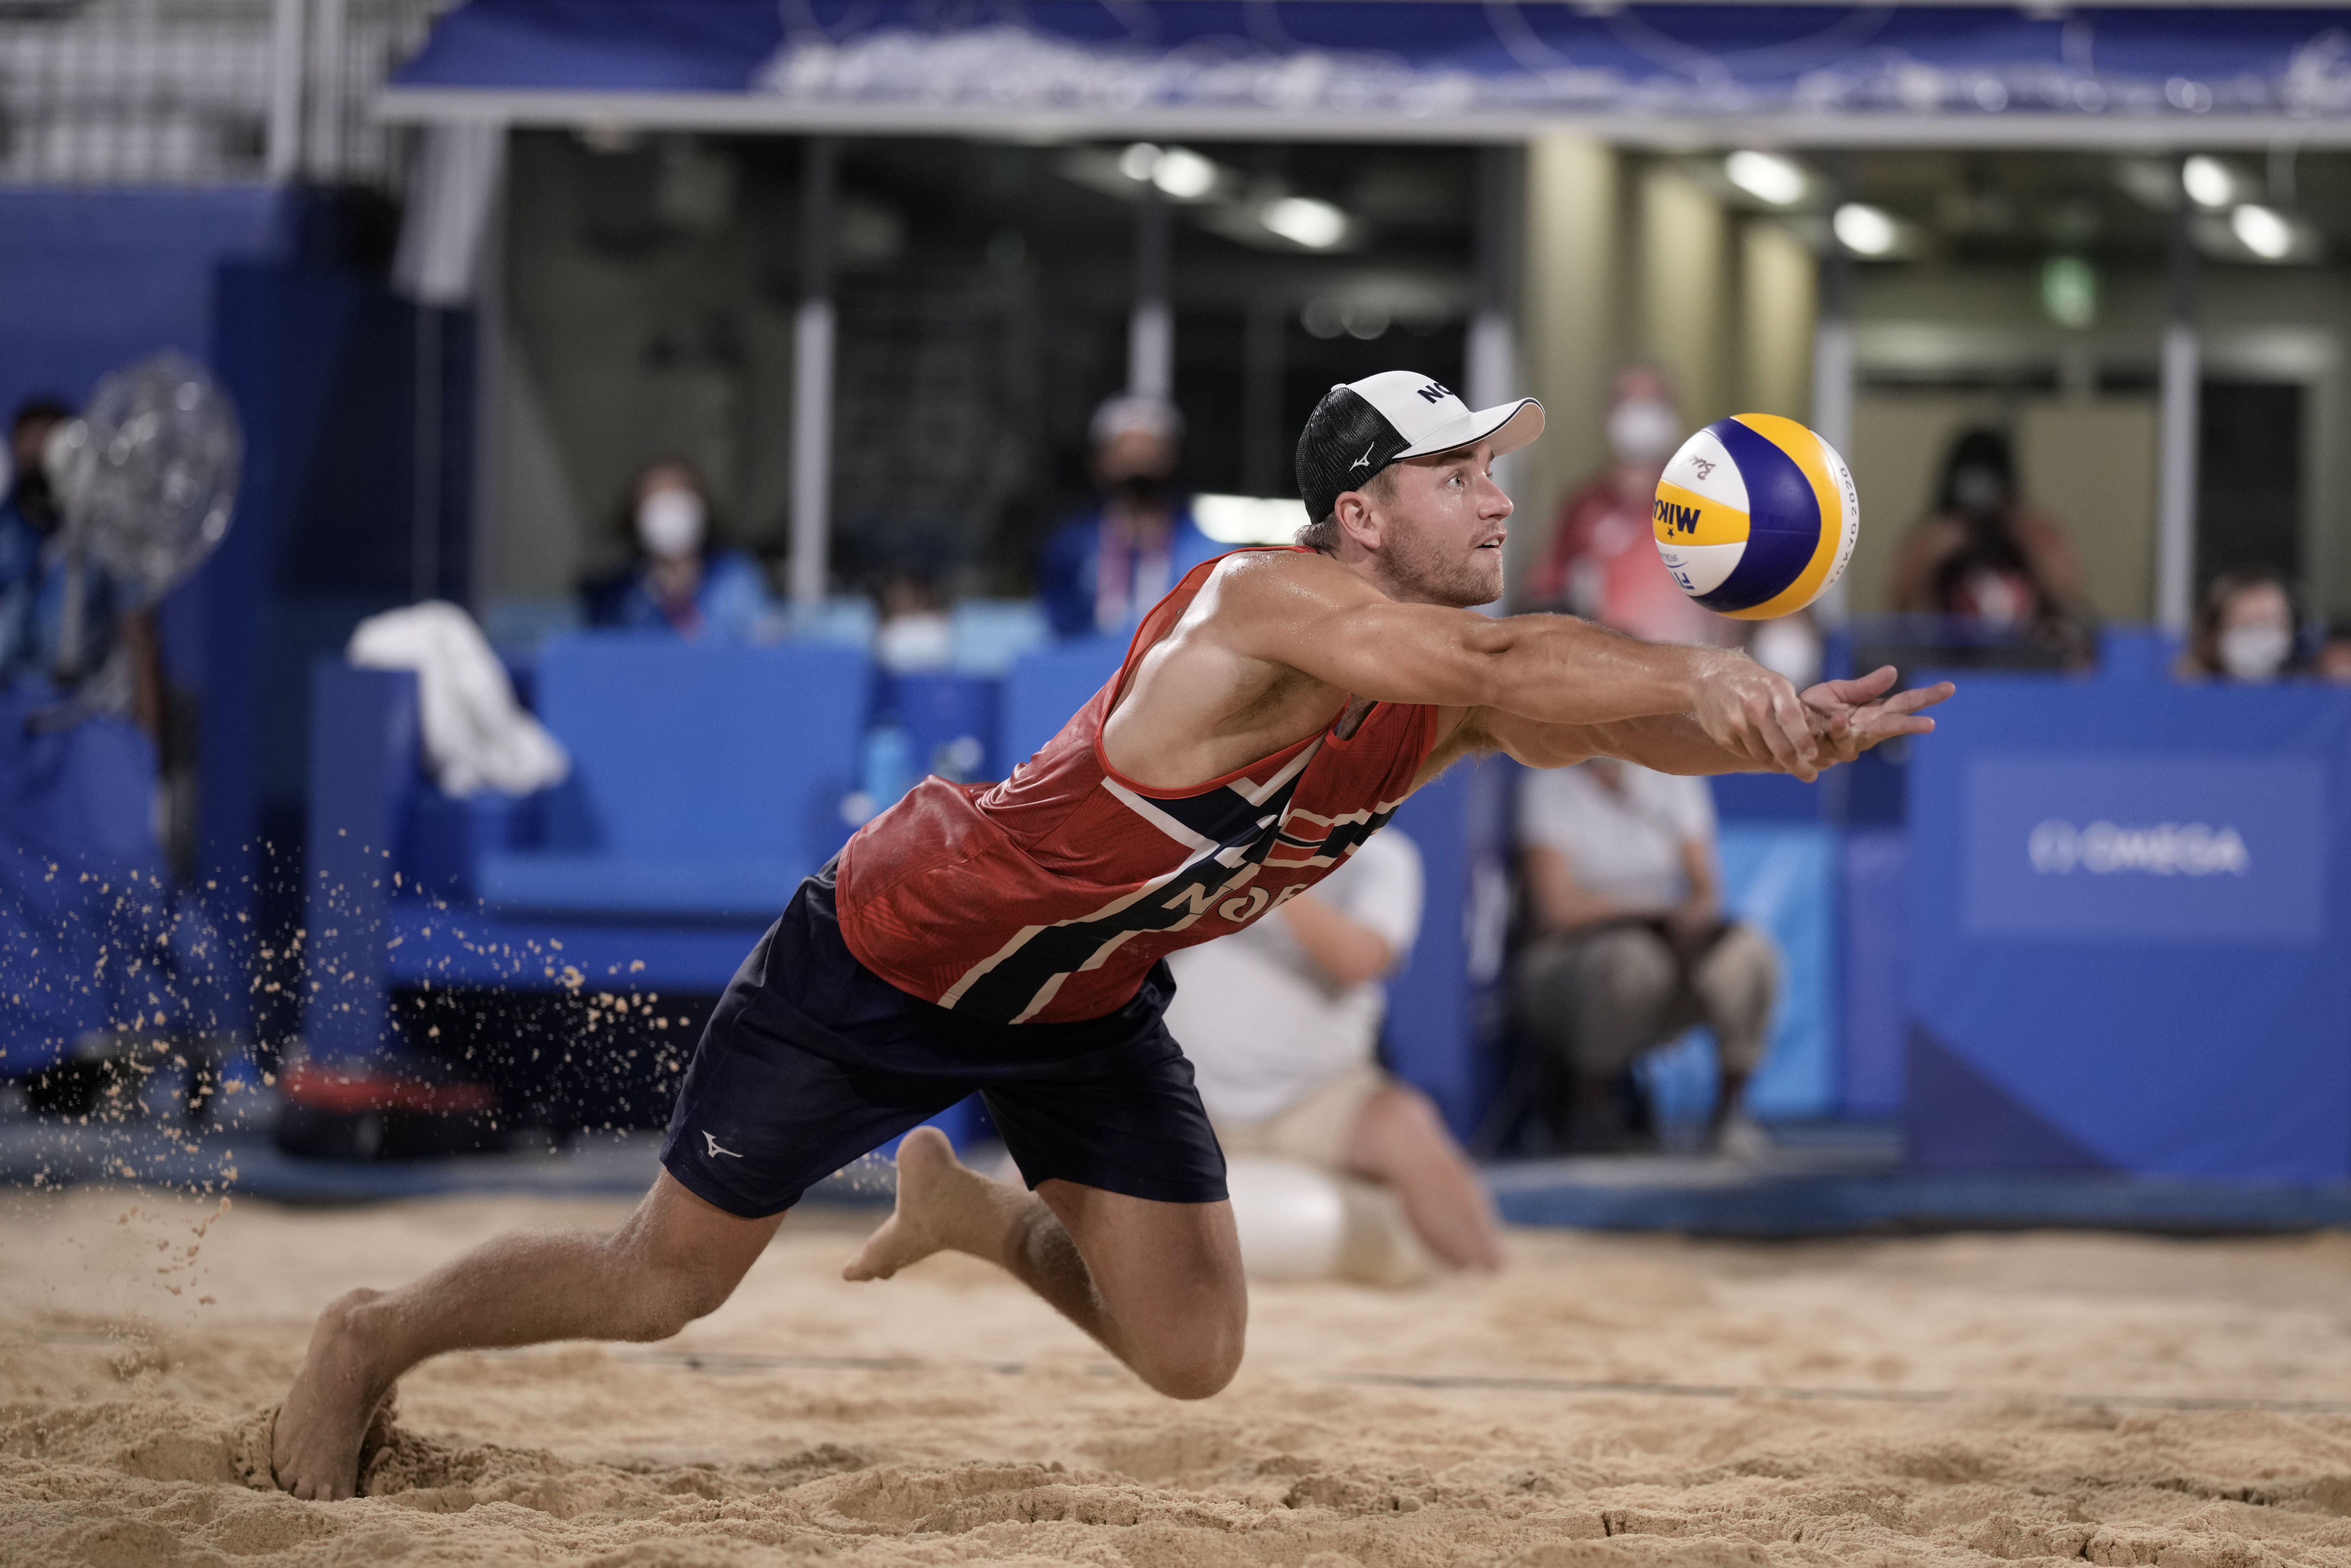 How to watch mens beach volleyball medal matches at Tokyo Olympics Free live stream, Time, USA TV, channel